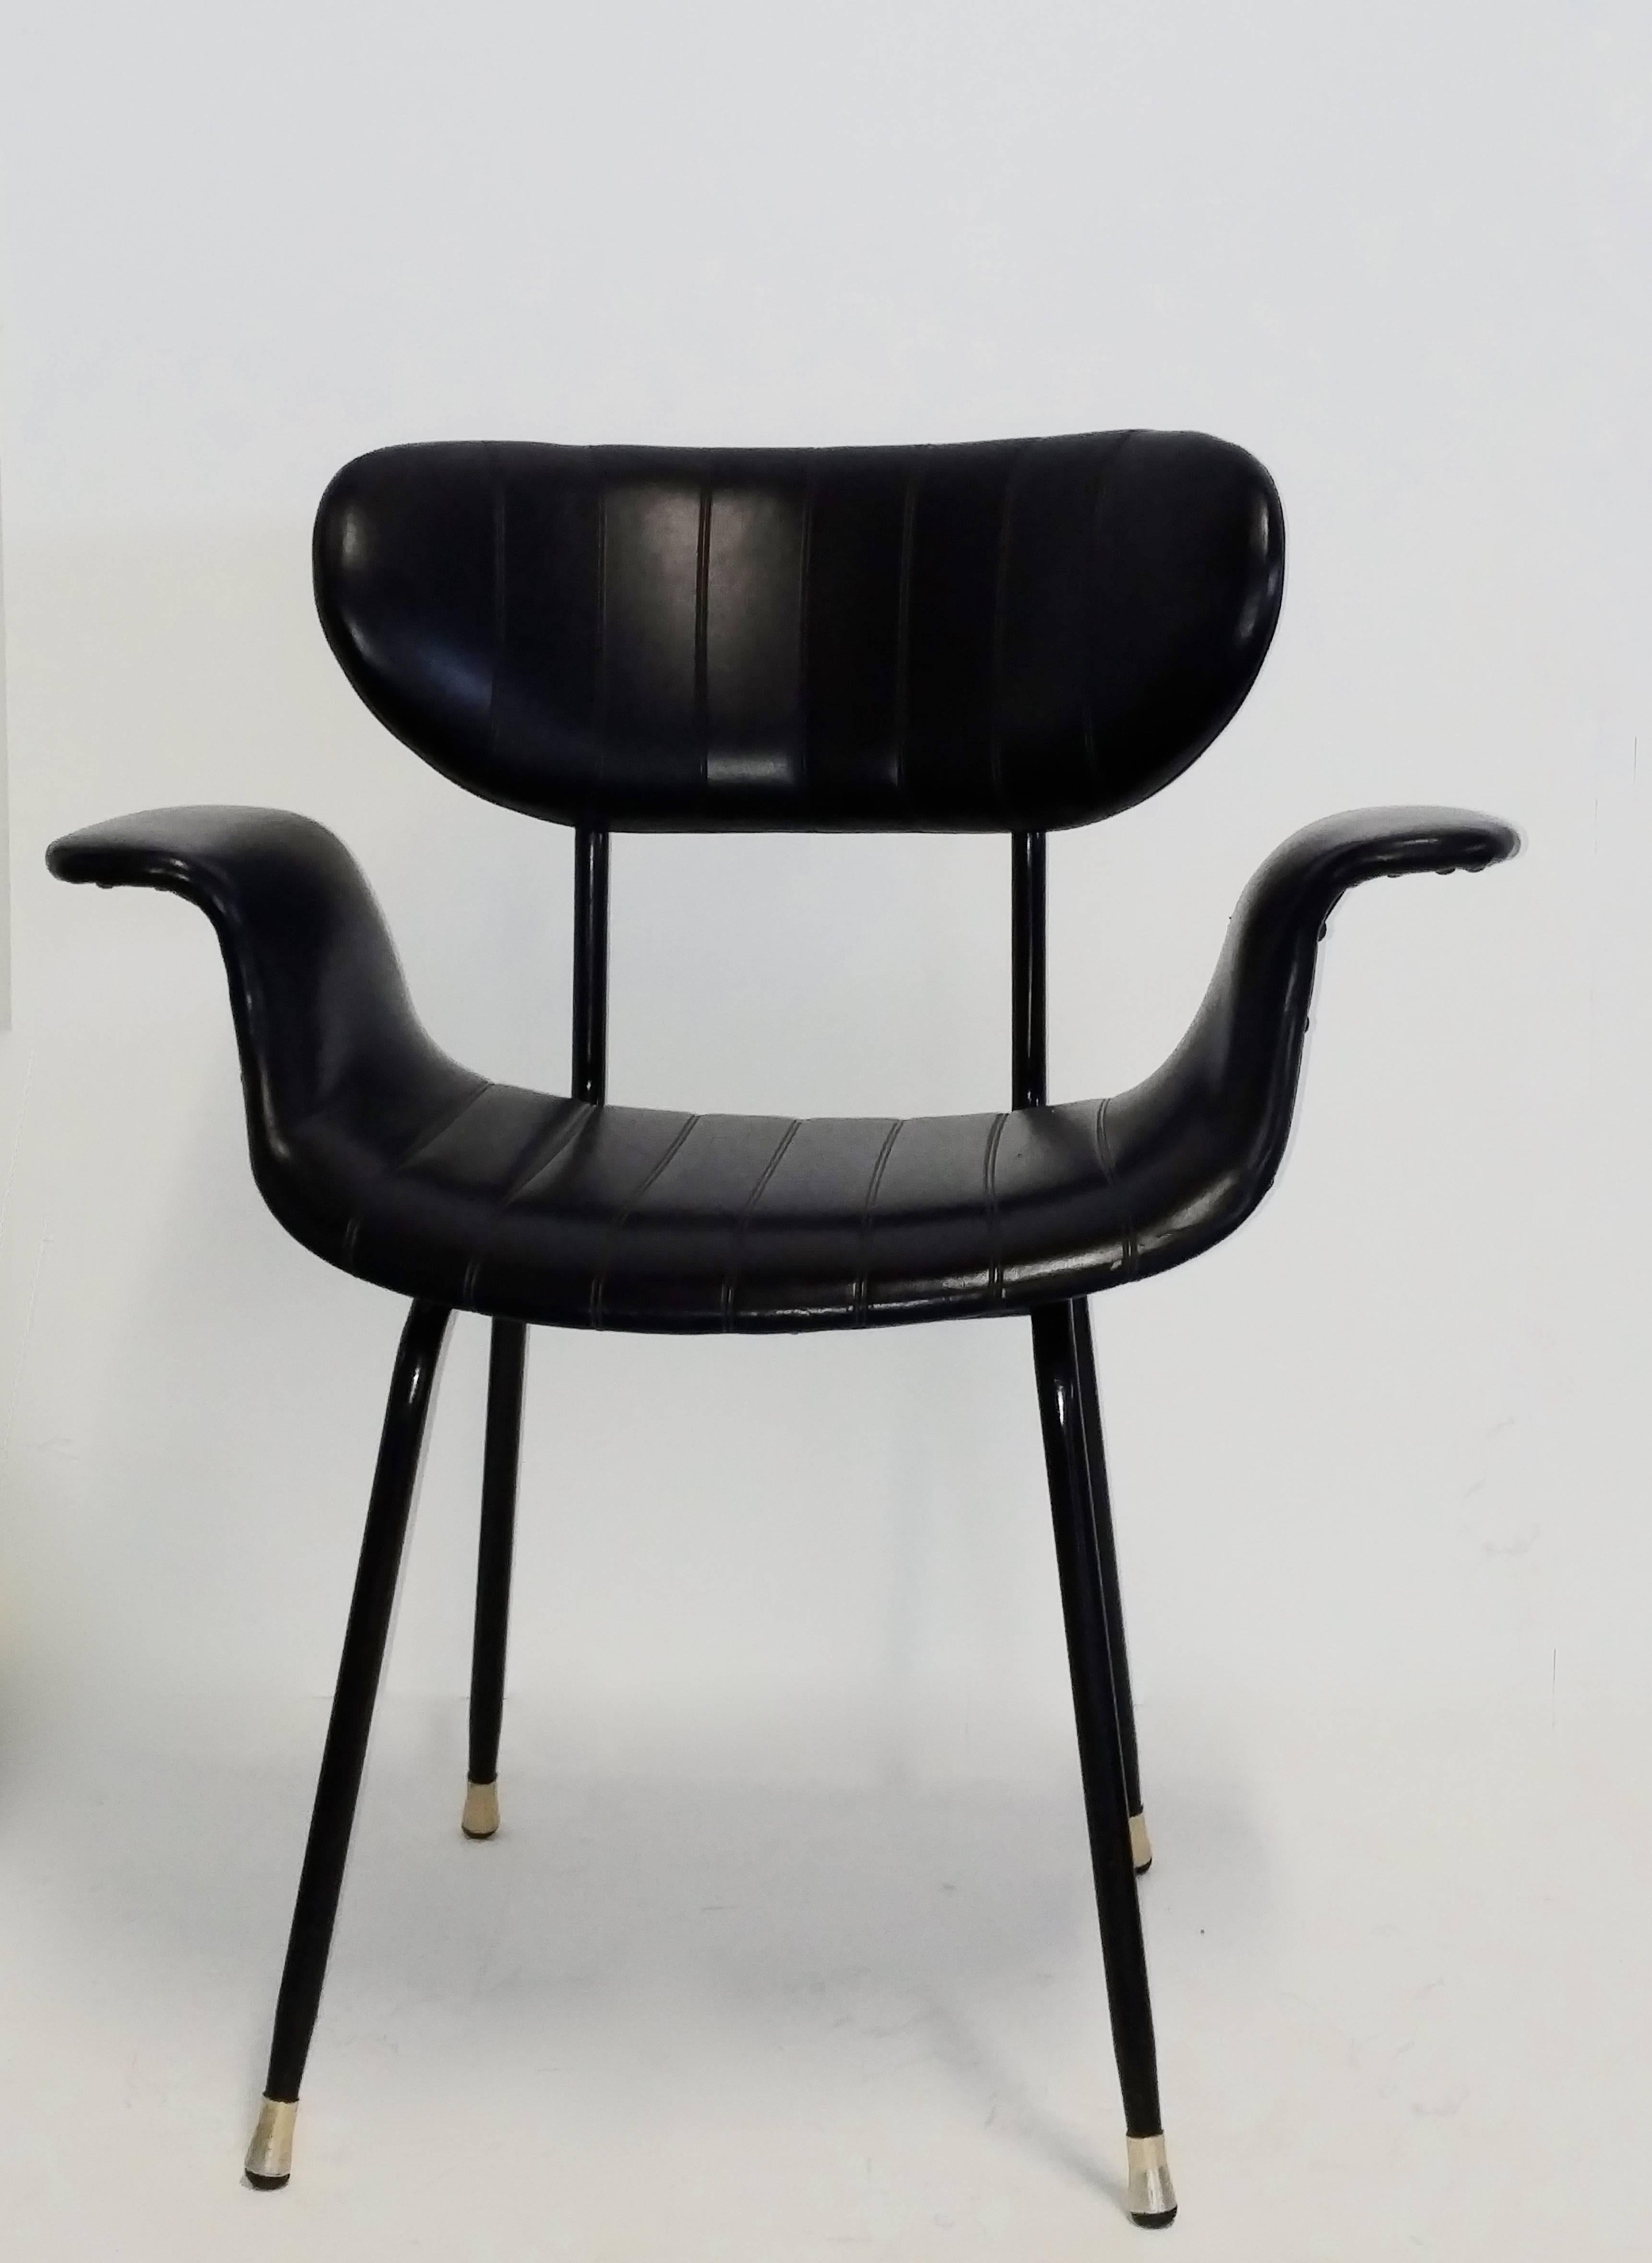 Mid-Century Italian chair with swan type curved armrests, rosewood shell and backrest. Upholstered in black leather. The black metal frame has brass feet.